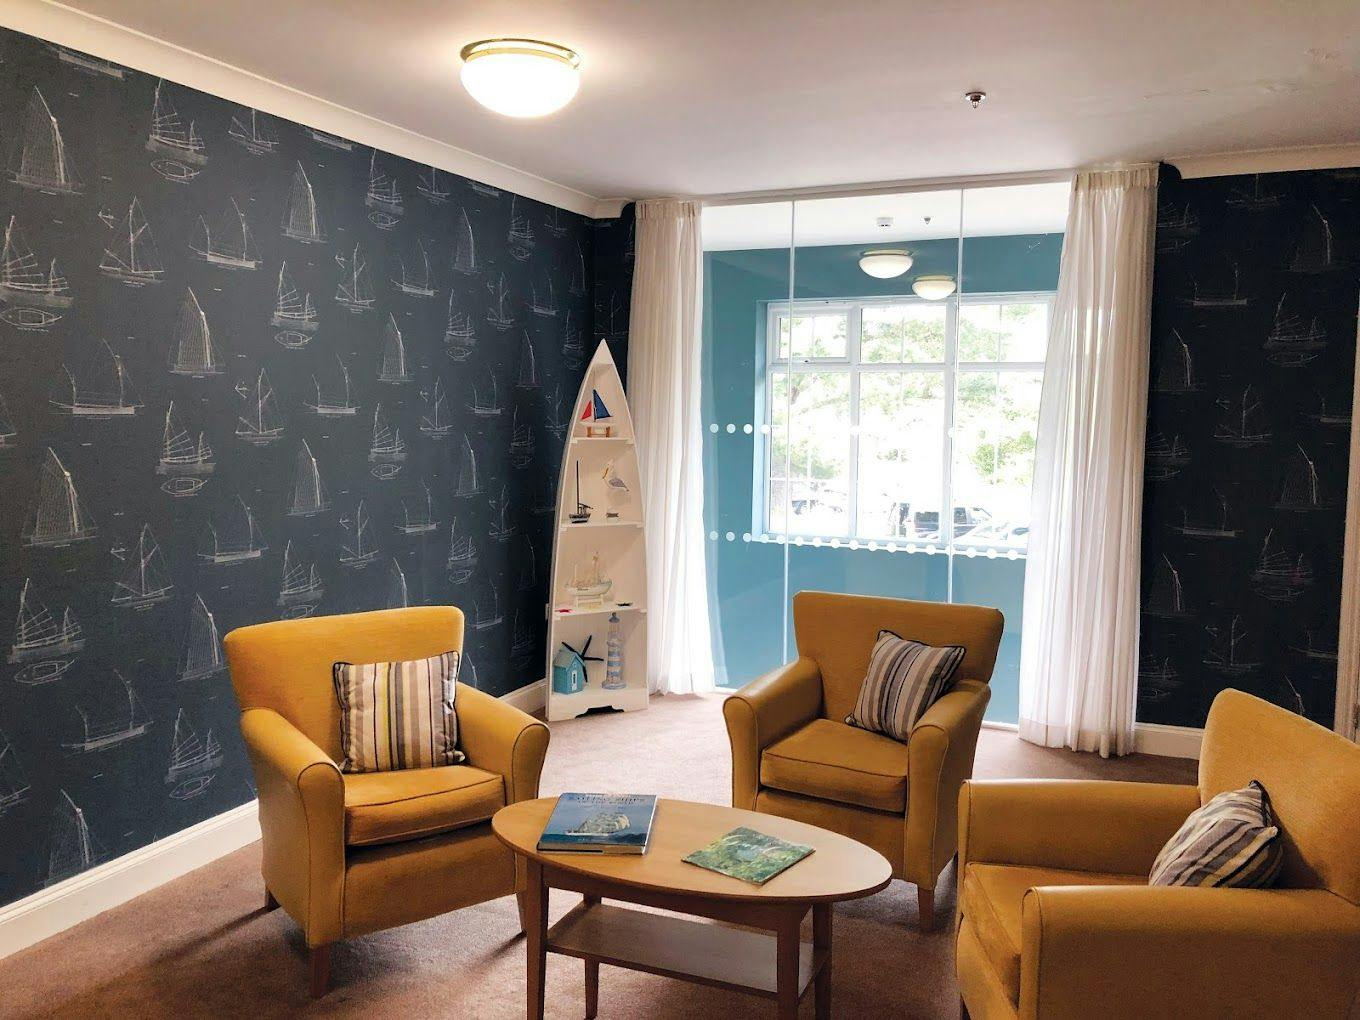 Lounge of Wickmeads care home in Bournemouth, Hampshire